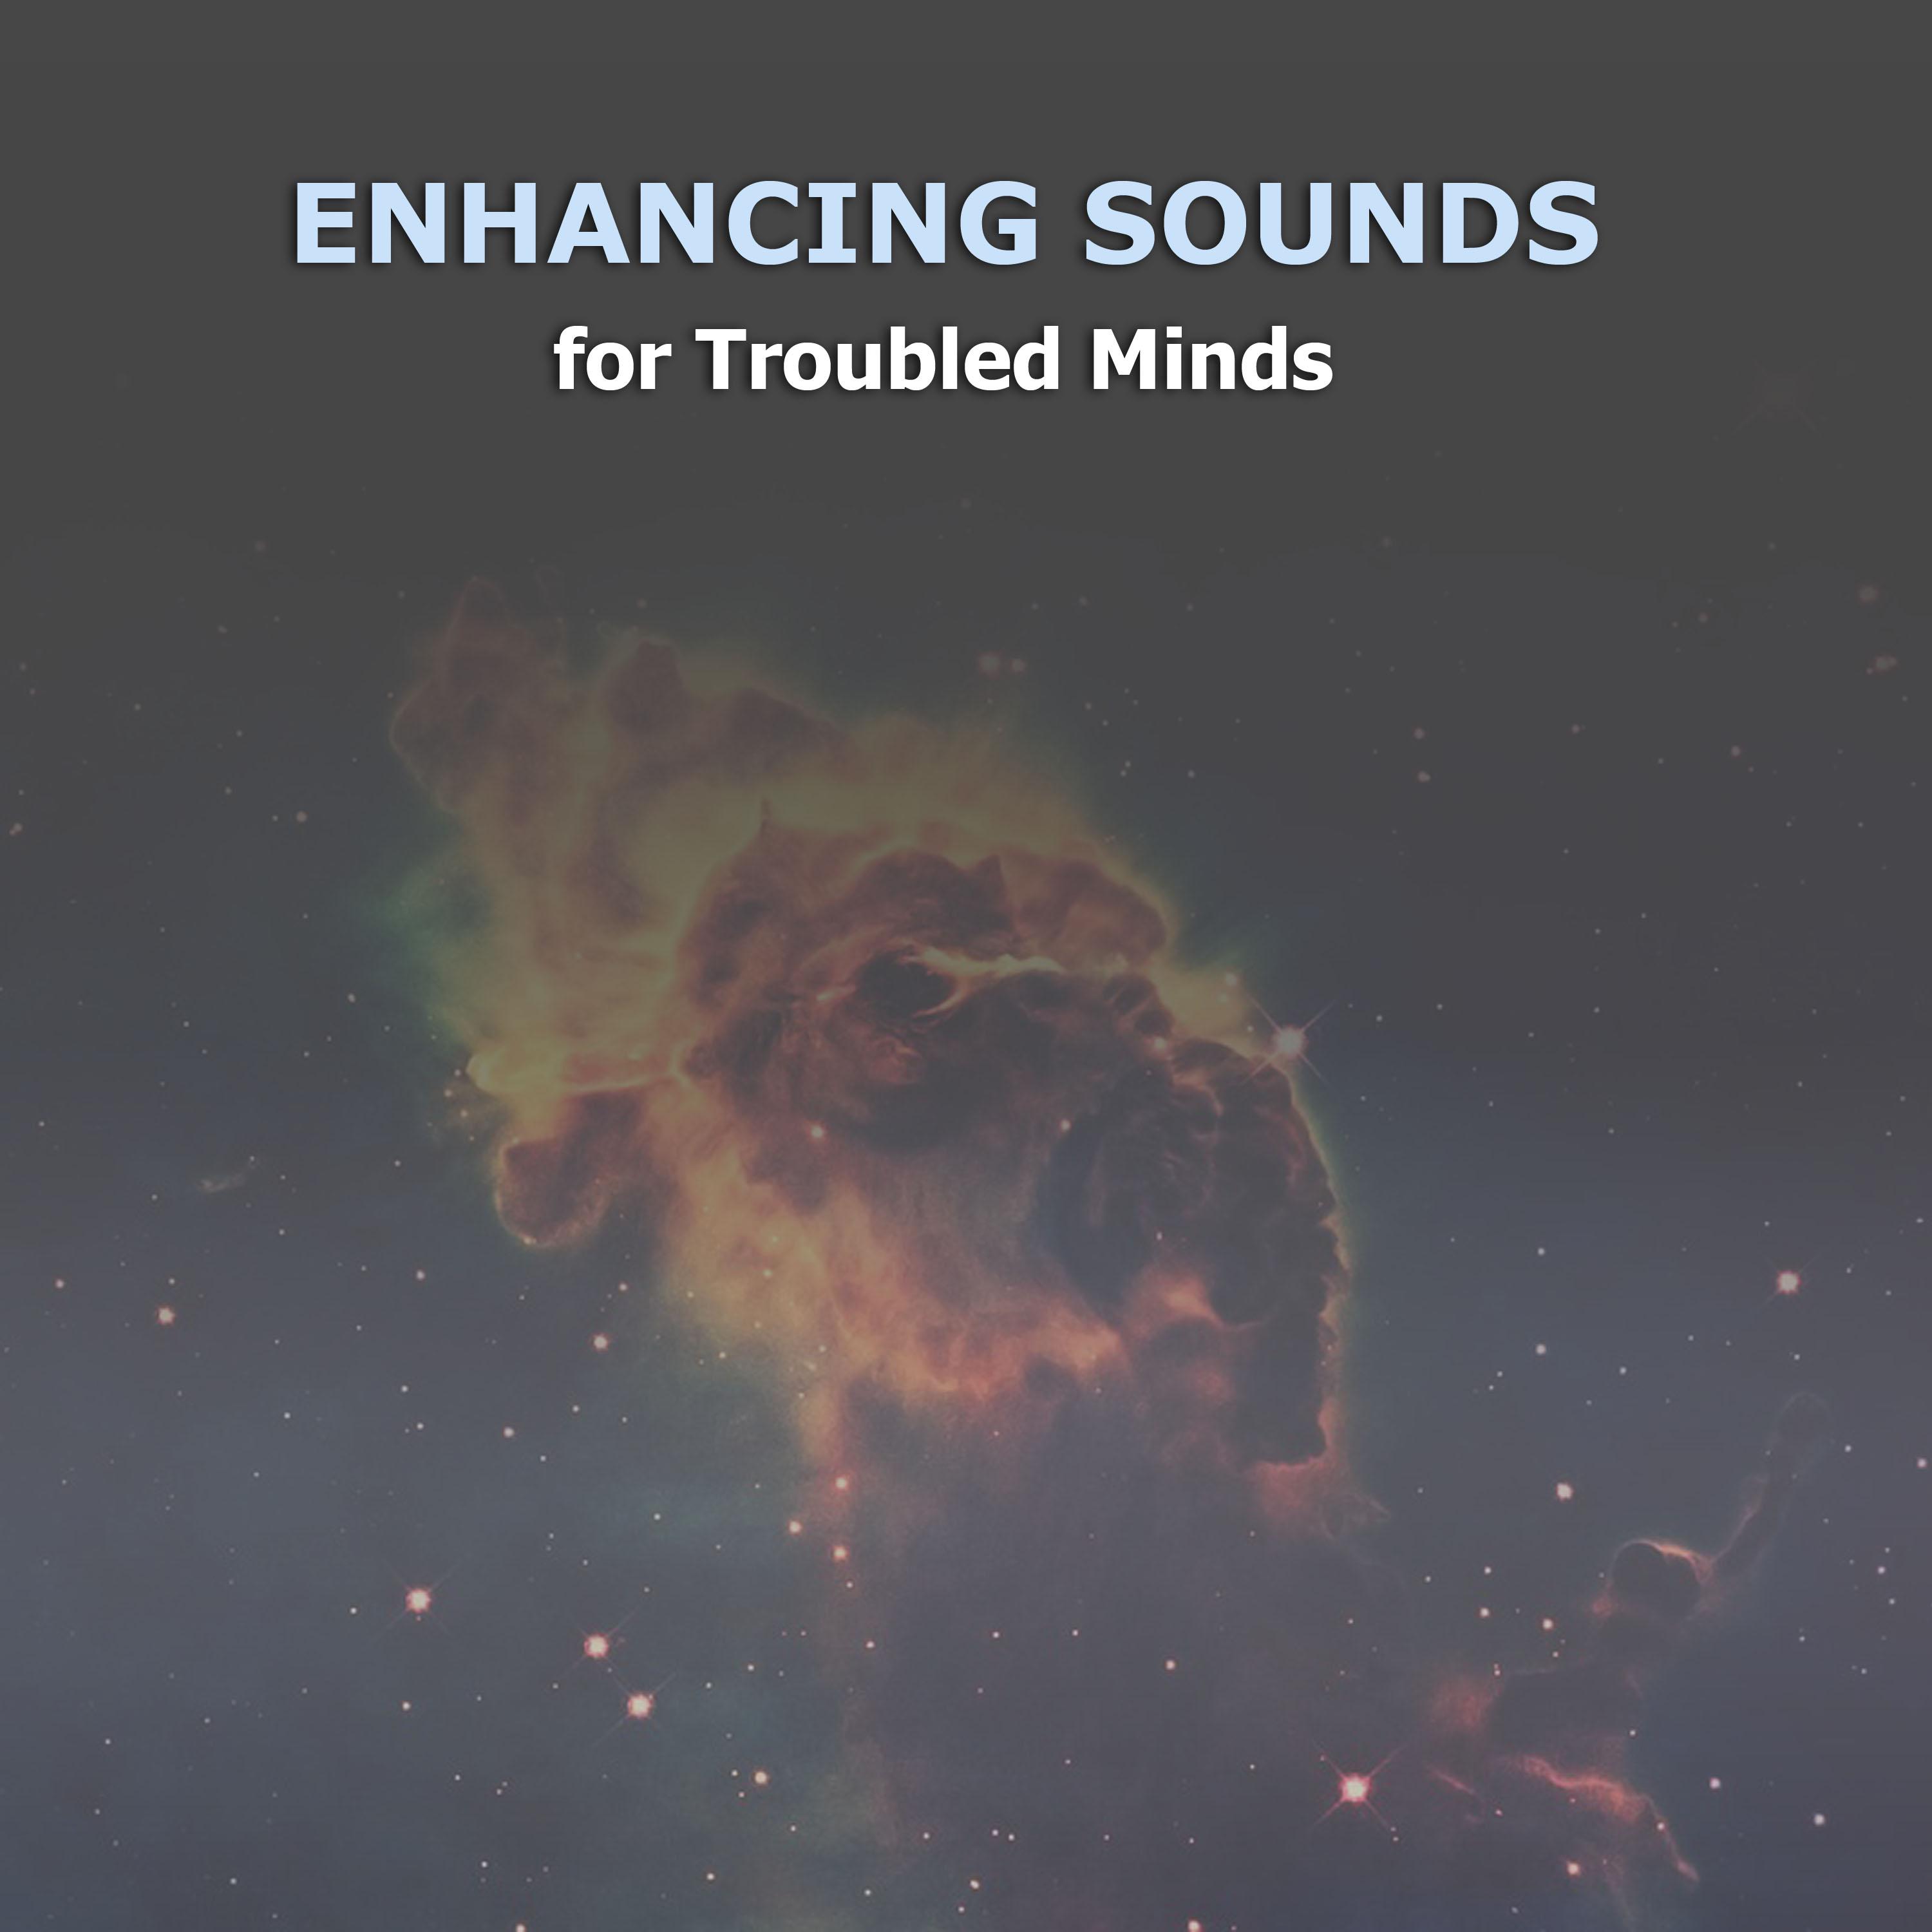 13 Relaxing Binaural Sounds for Out of Body Experiences